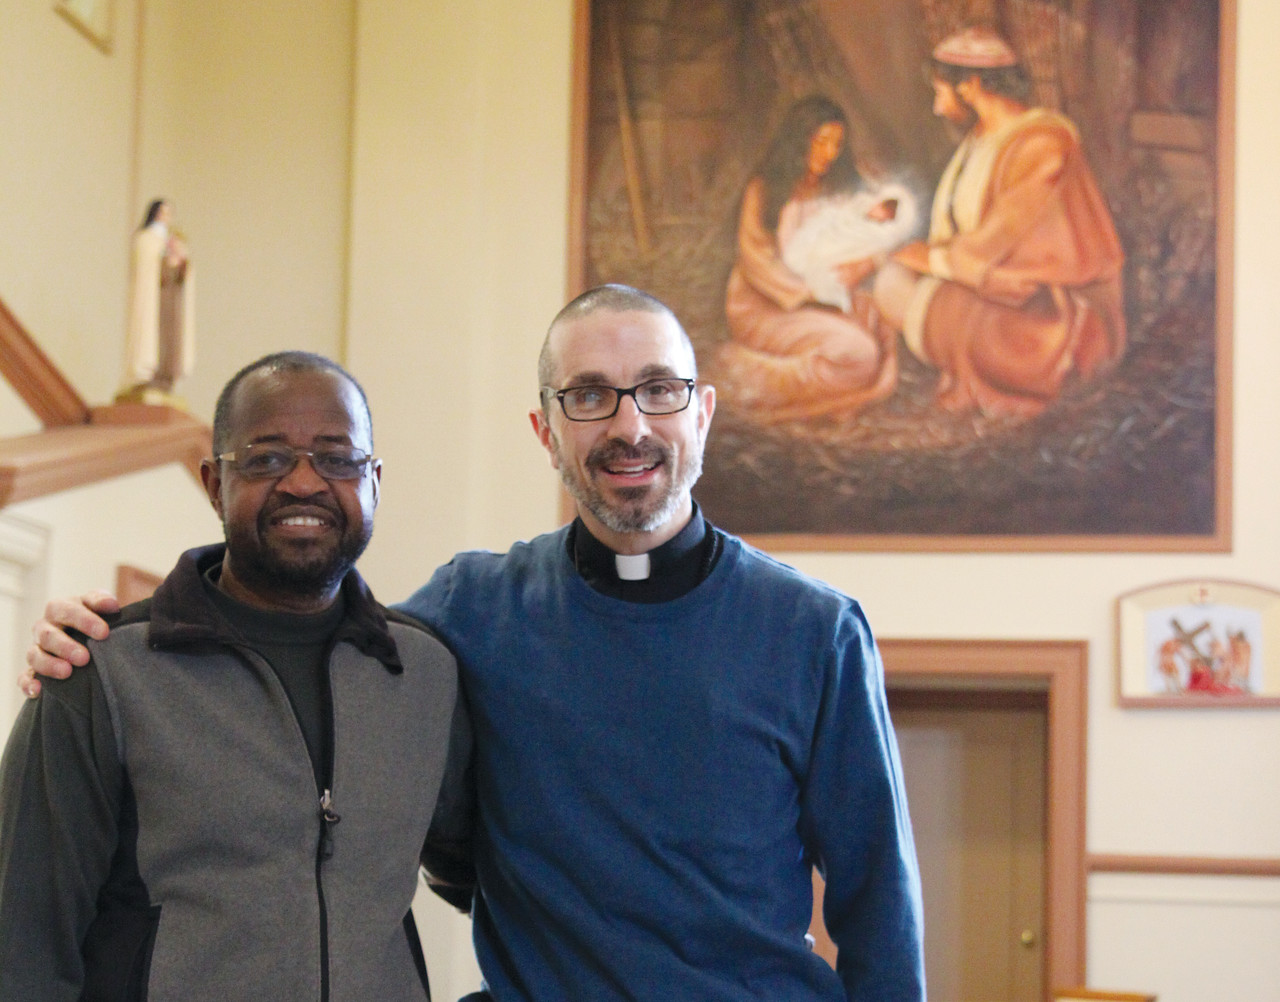 SOLIDARITY: From left to right, artist Munir Deishinni Mohammed and Father James Ruggieri hope their collaboration on the St. Patrick renovations will encourage other interfaith projects in the community. Both men named the nativity scene, pictured behind them, as their favorite painting in the collection.